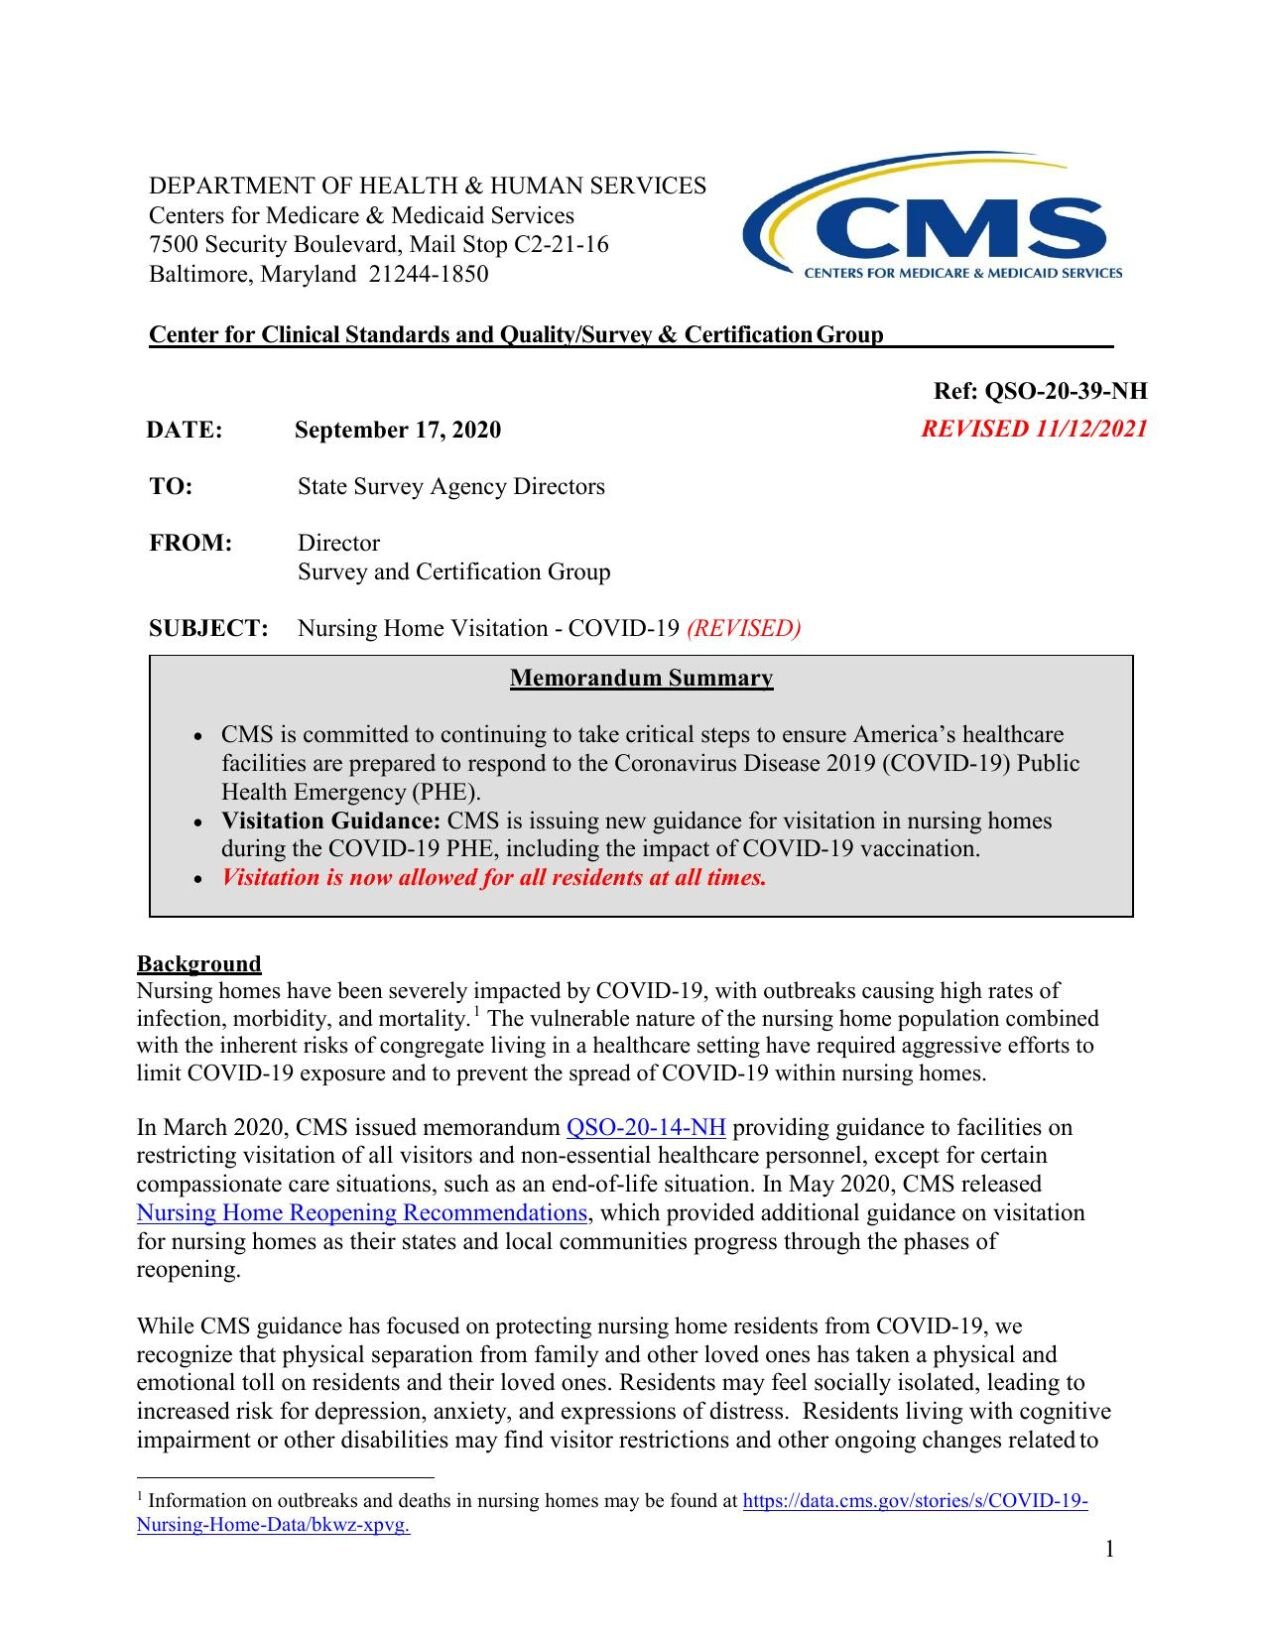 CMS' revised policy